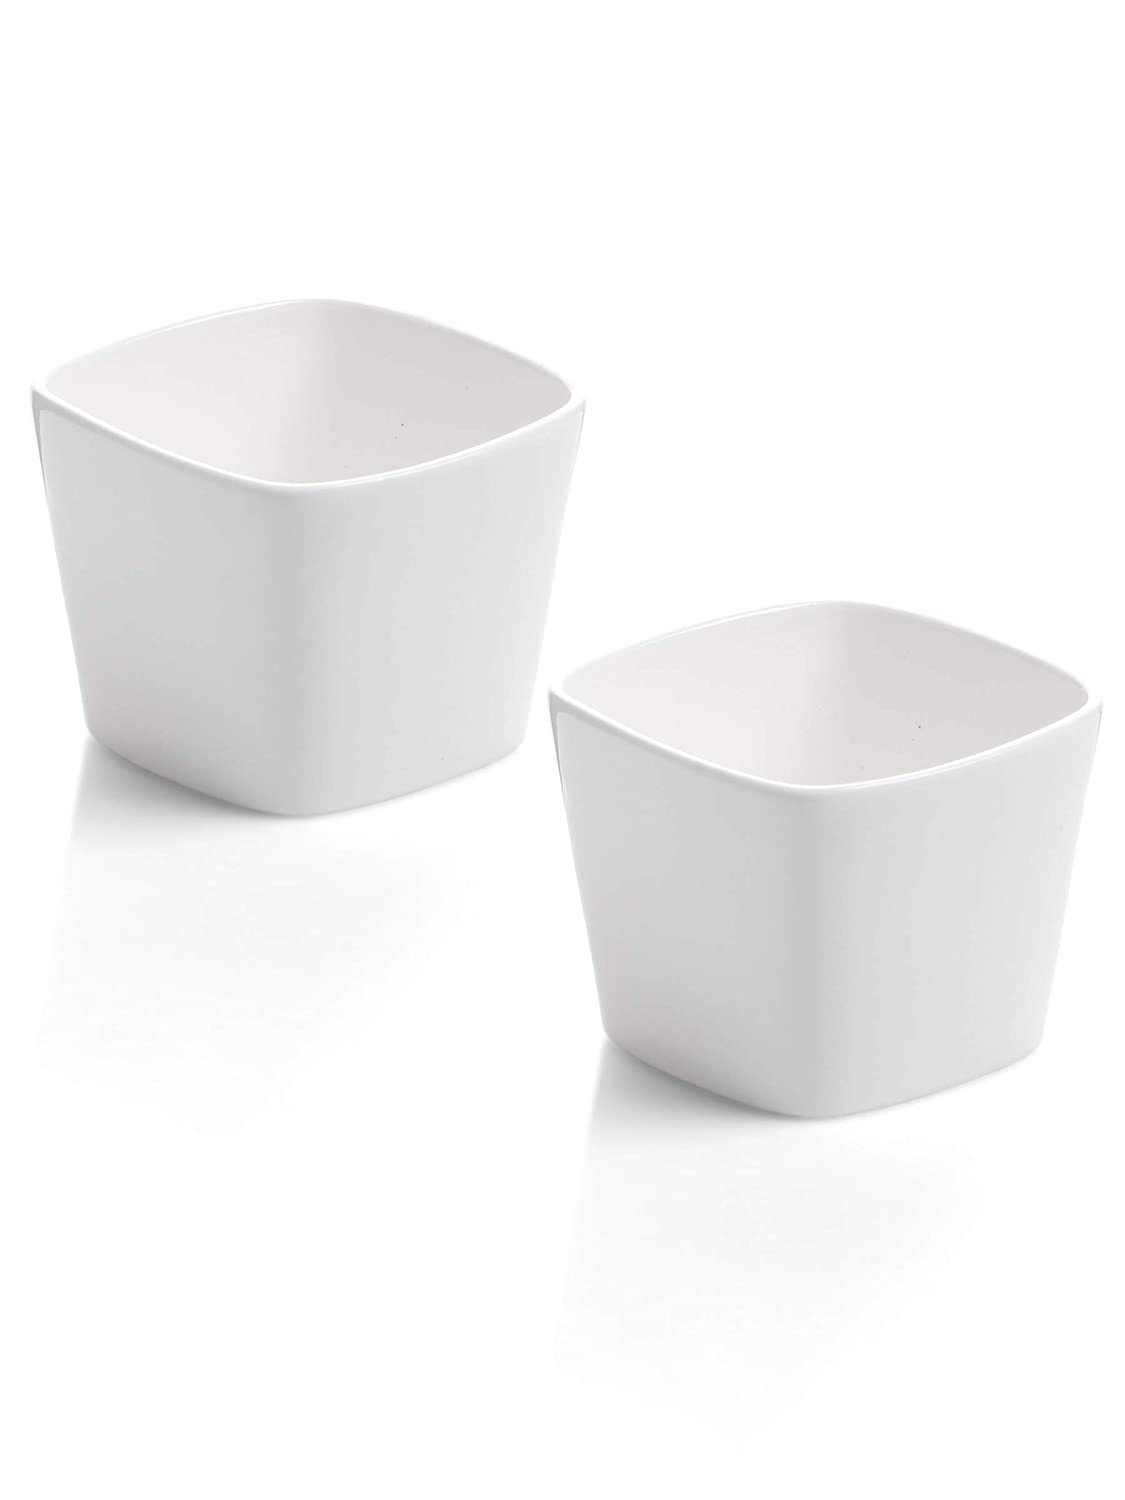 Clay Craft Basic Bowl Square 4 Piece Small Plain White